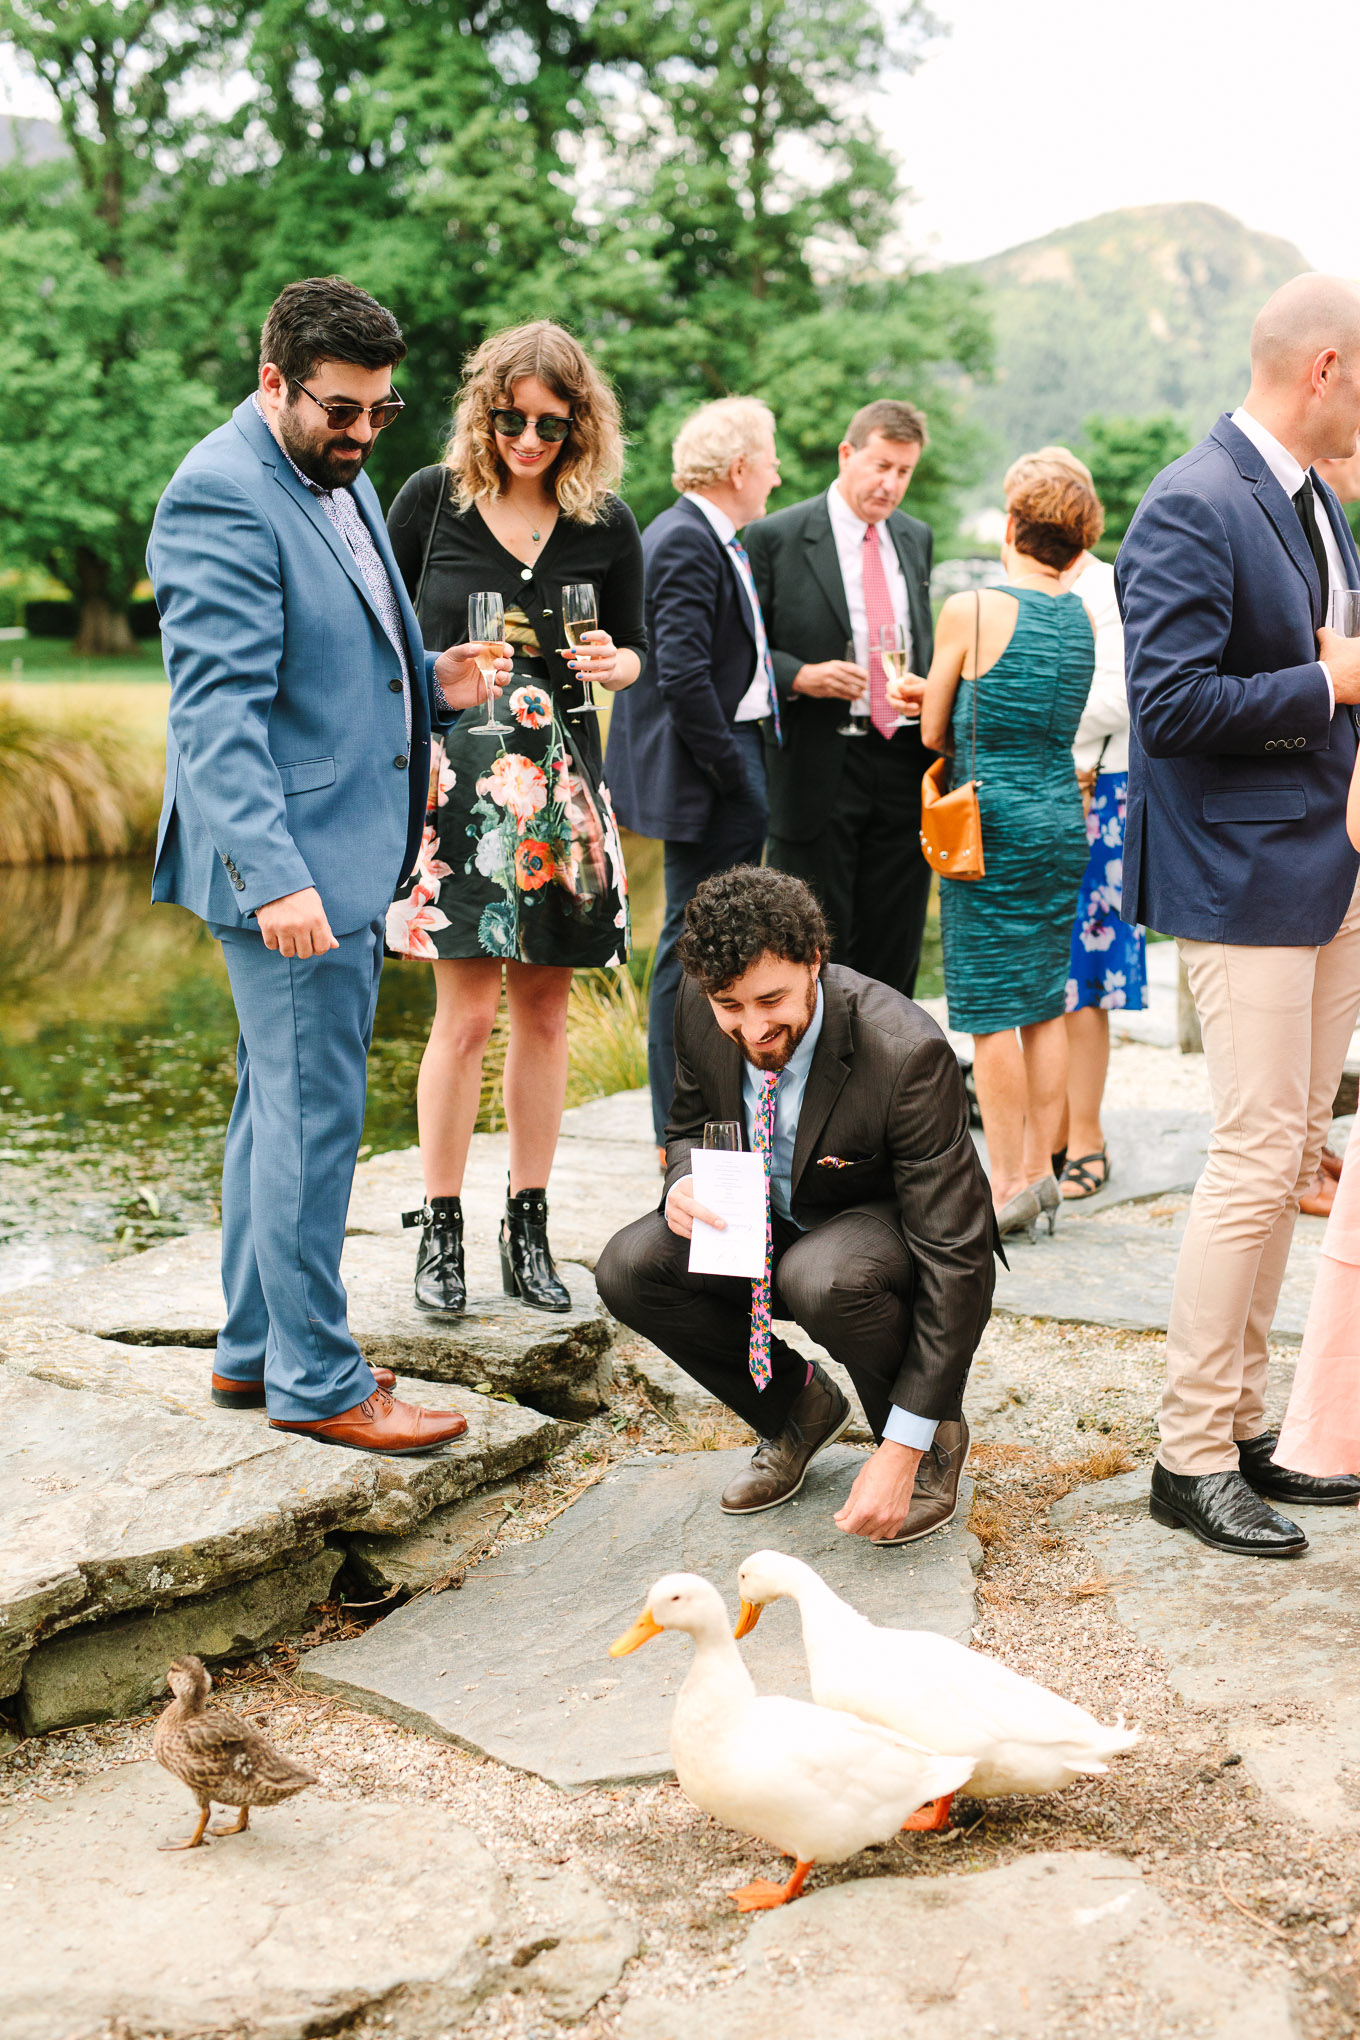 Guests feeding ducks during cocktail hour. Millbrook Resort Queenstown New Zealand wedding by Mary Costa Photography | www.marycostaweddings.com